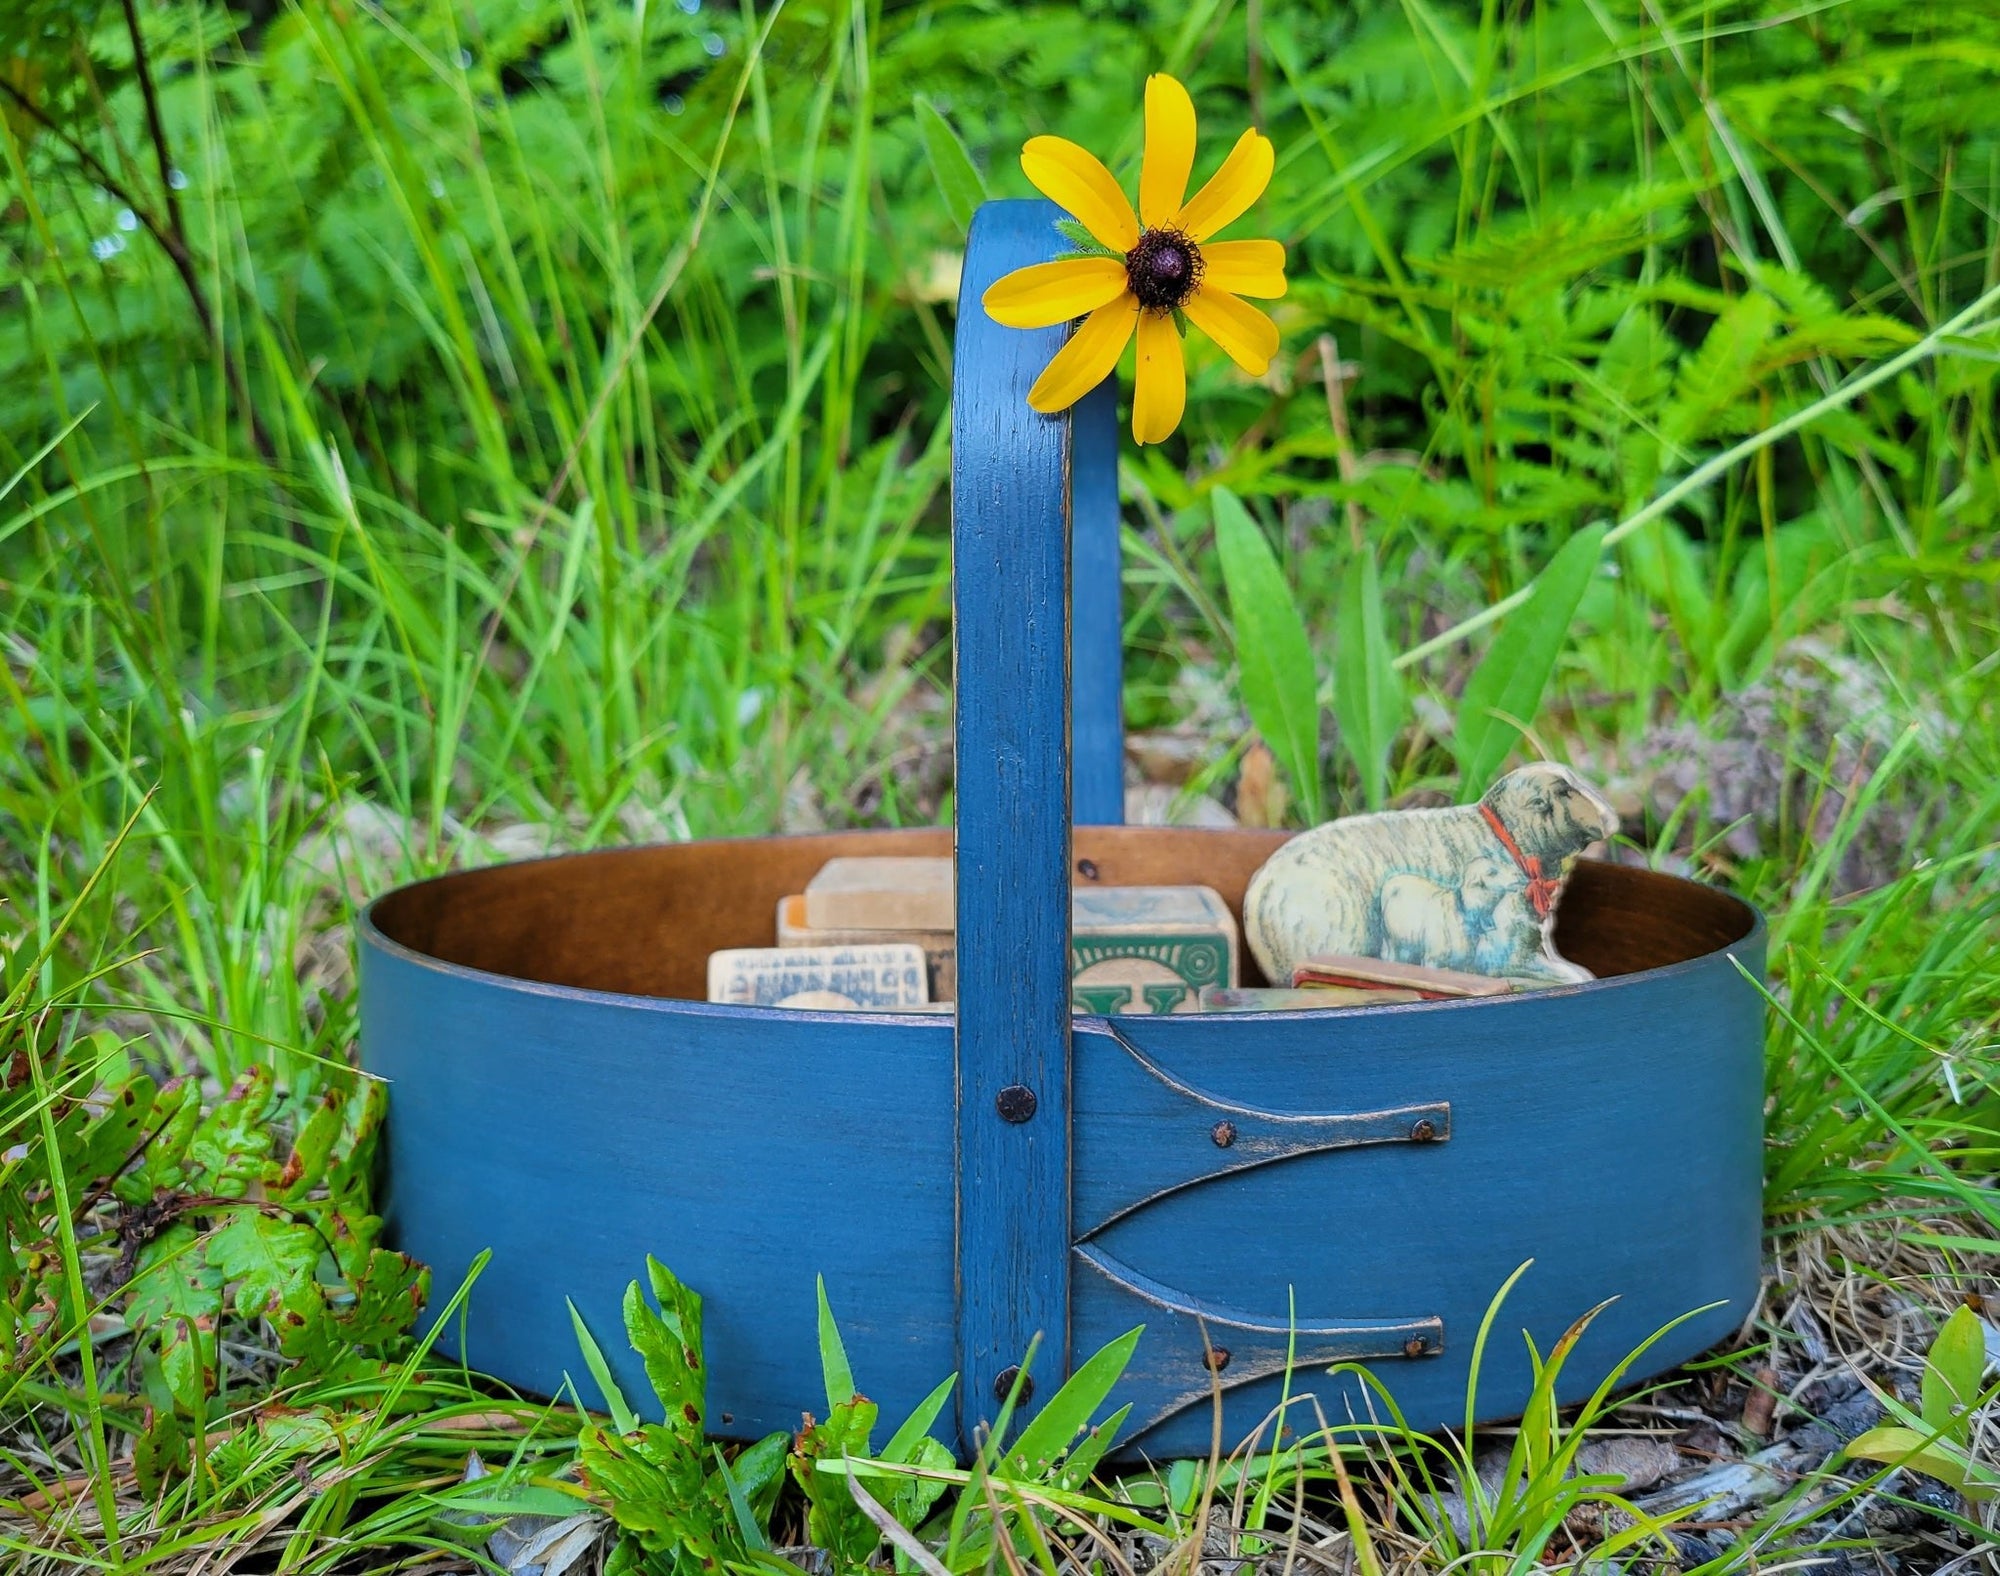 Small Shaker Style Sewing Carrier, LeHays Shaker Boxes, Handcrafted in Maine, Blue Milk Paint Finish, Shown Outdoors